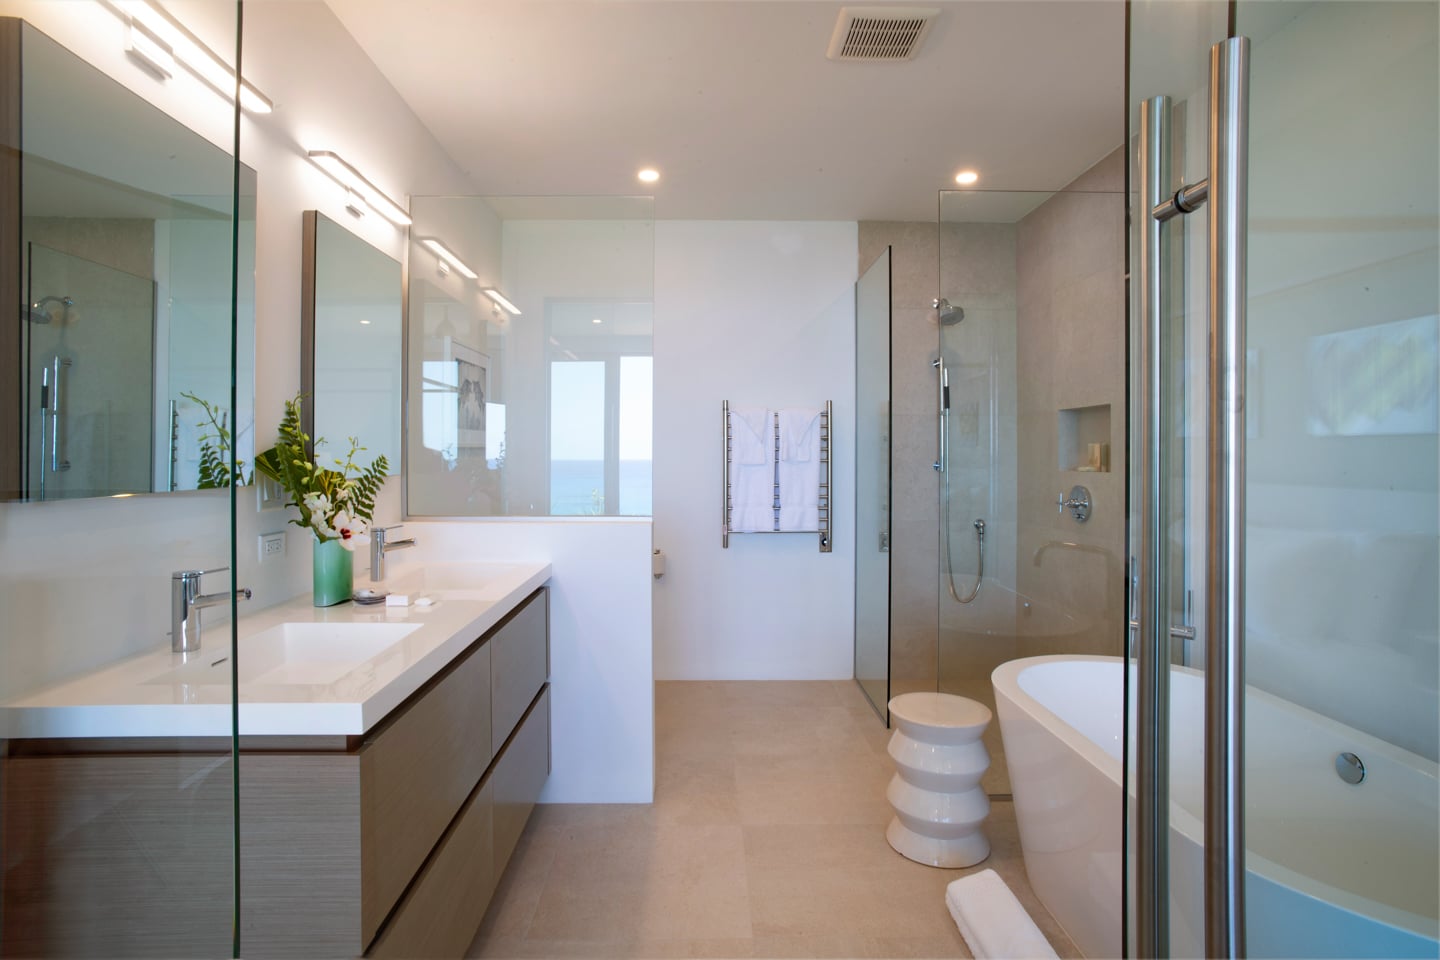 A bathroom with two sinks, a bath tub, and a shower booth.